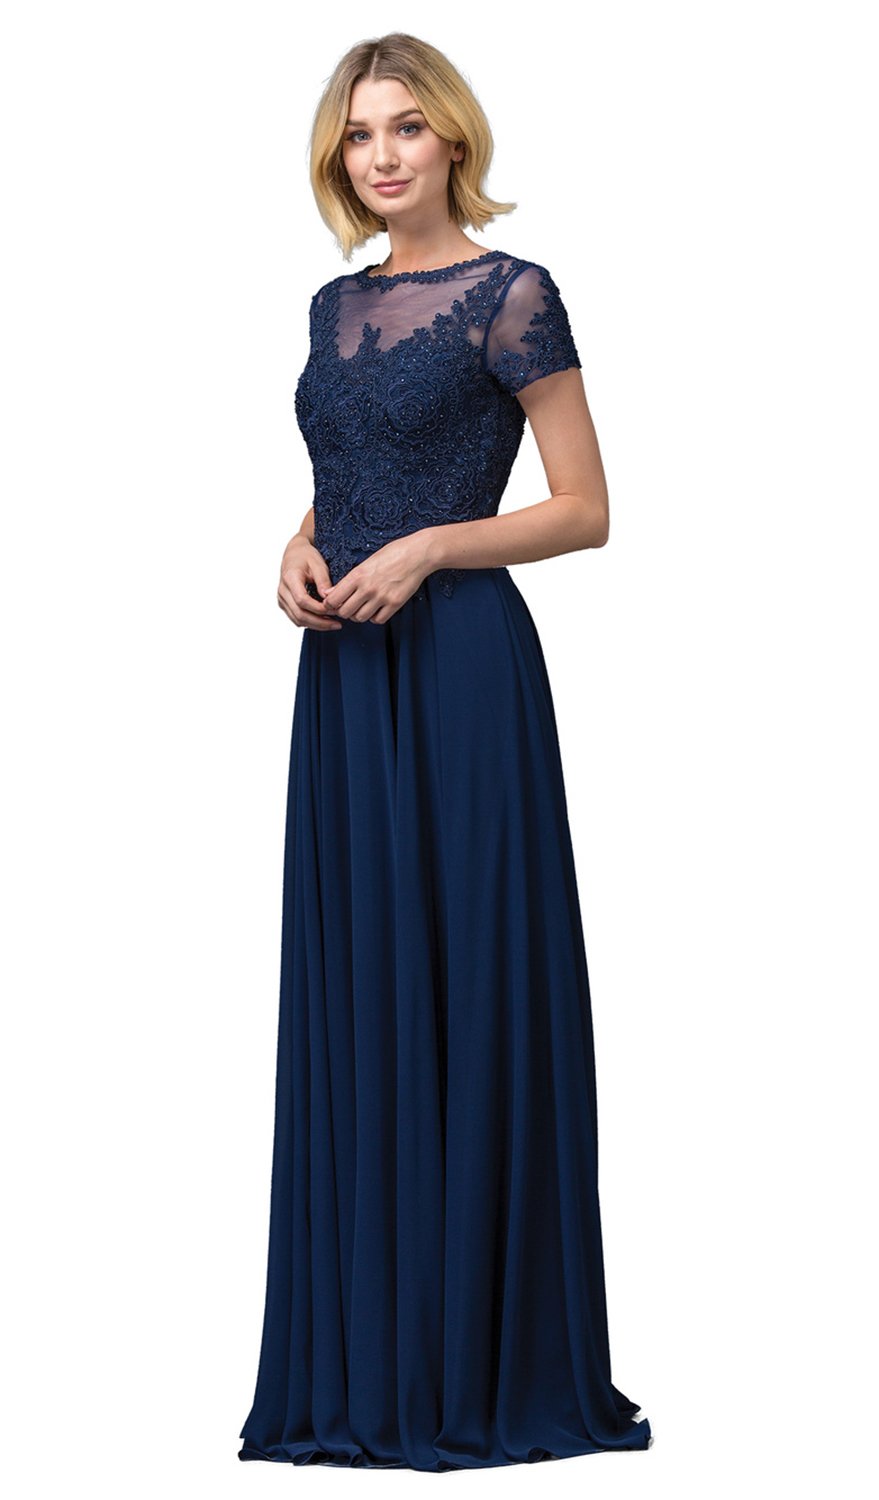 Dancing Queen - 2727 Embroidered Rosette Short Sleeve Long Dress In Blue